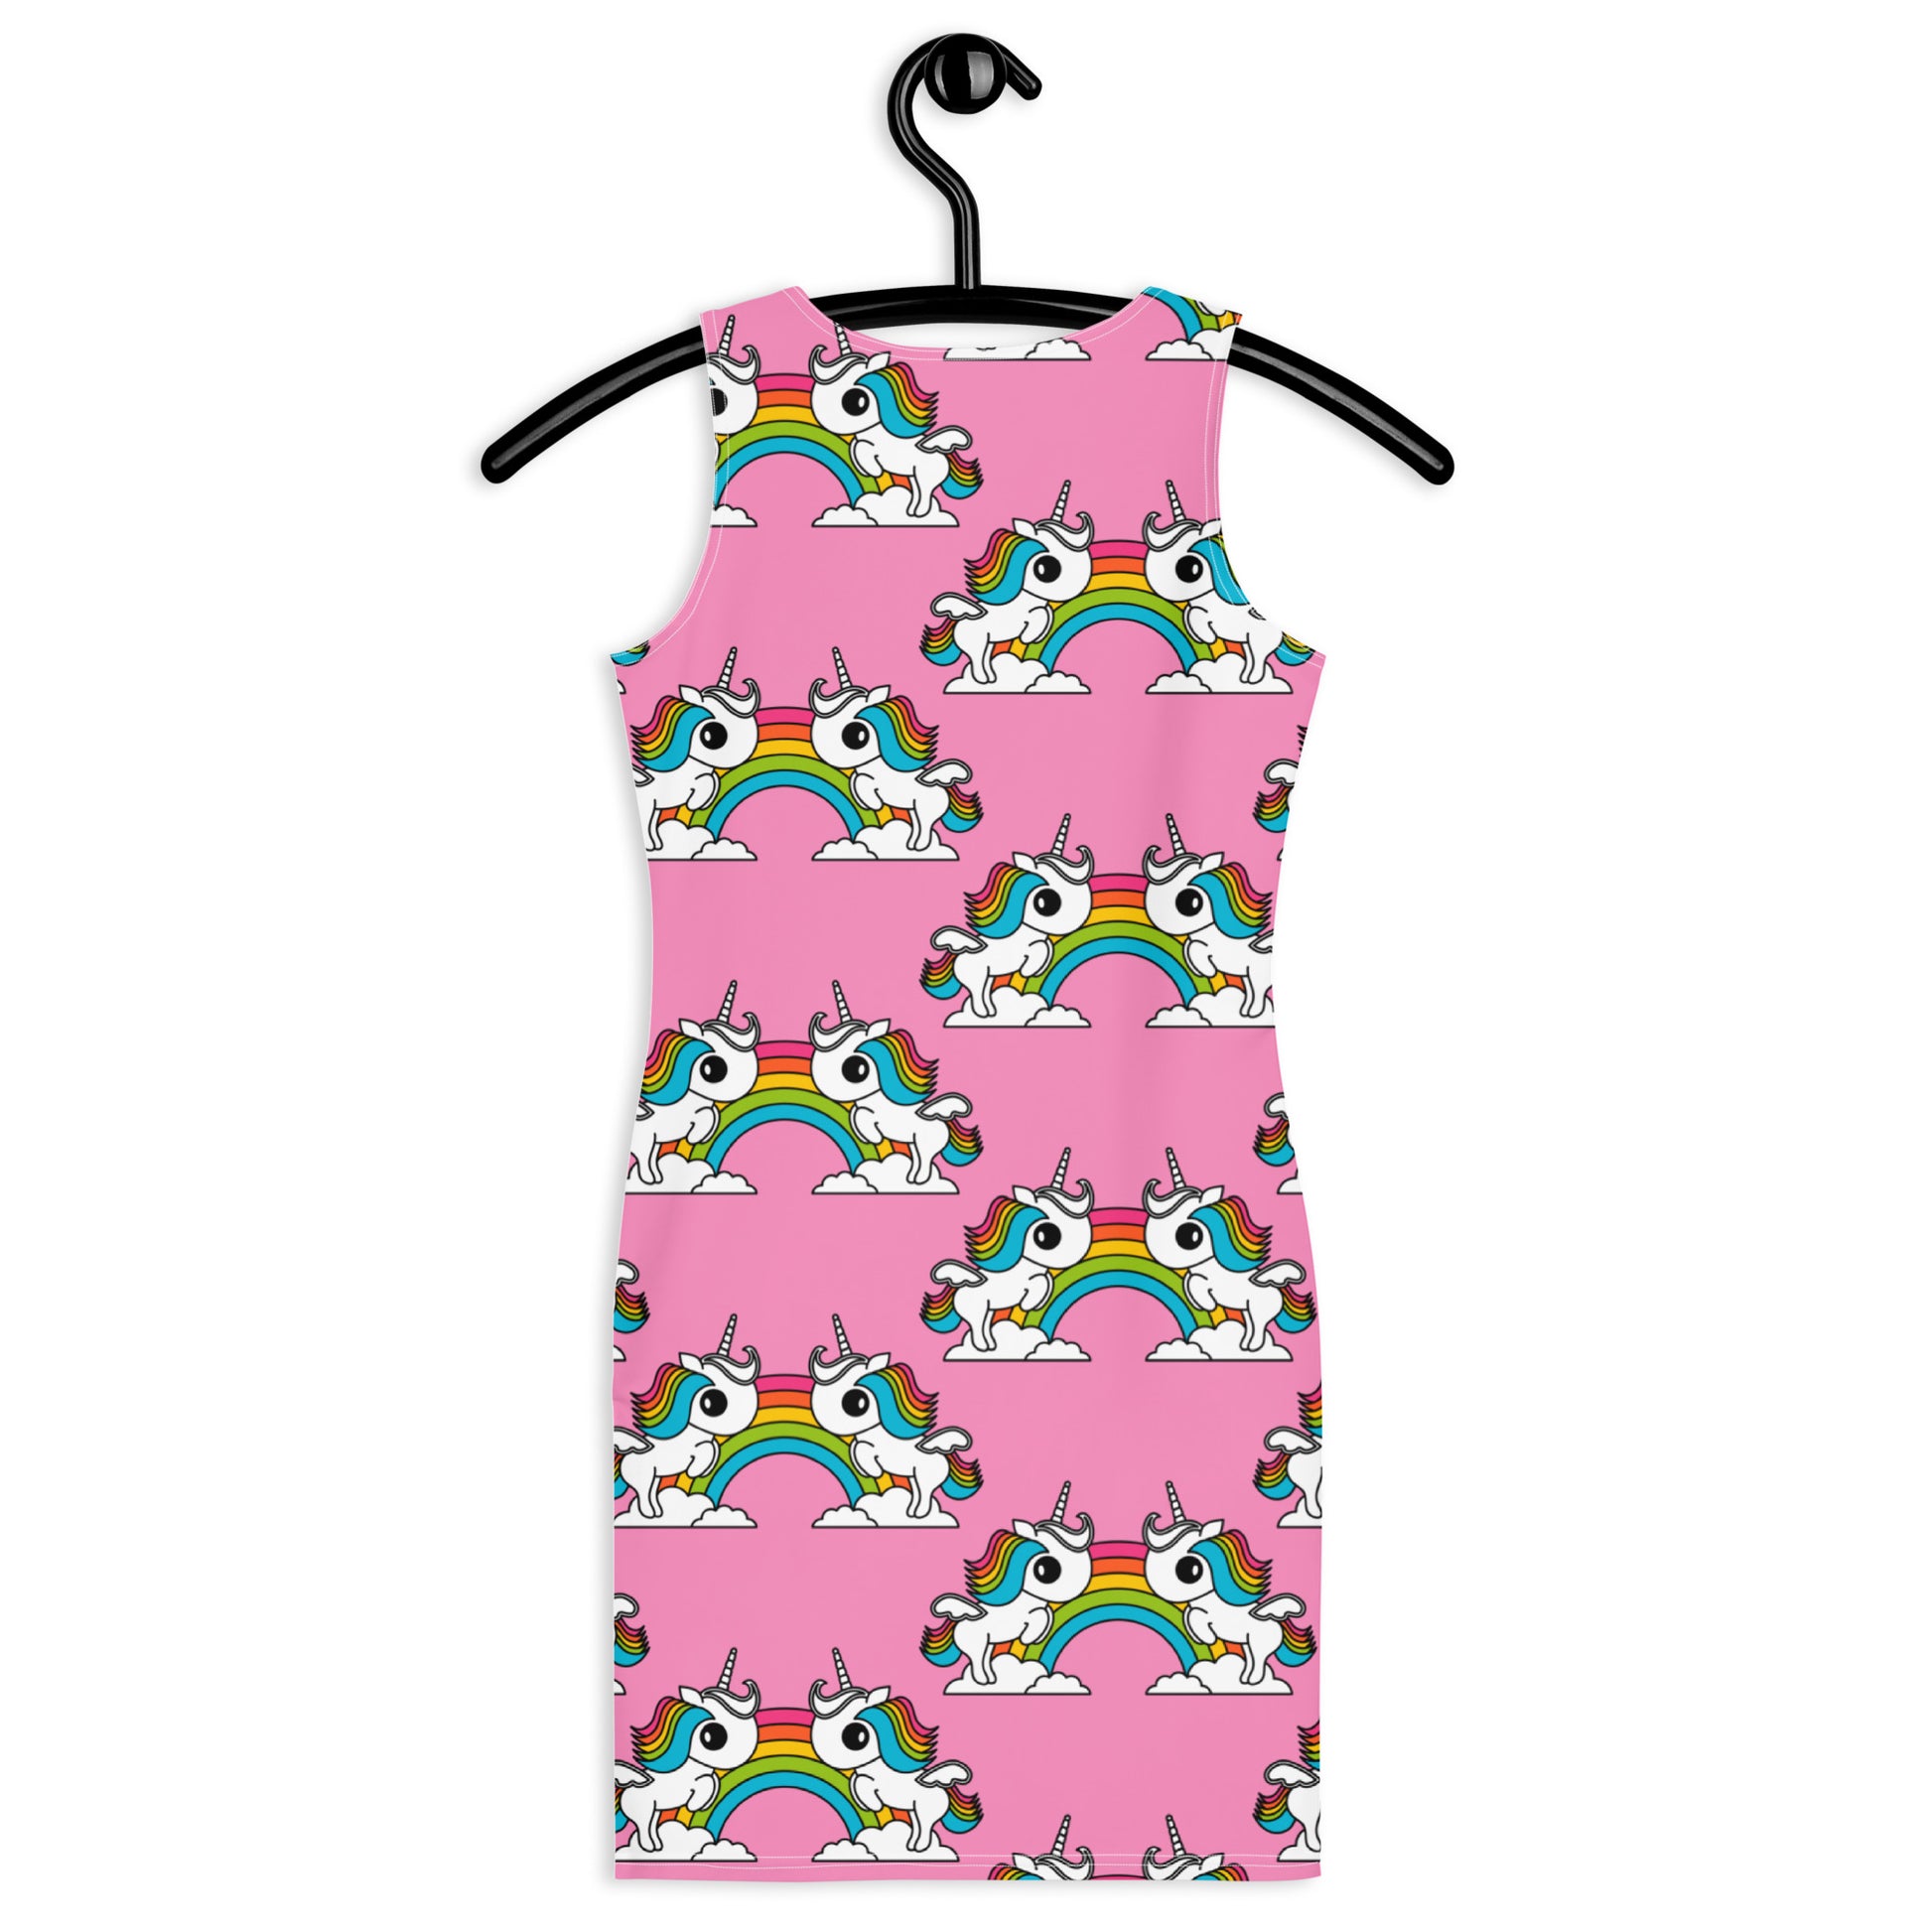 UNIQUE pink - Fitted Dress with unicorns and rainbows